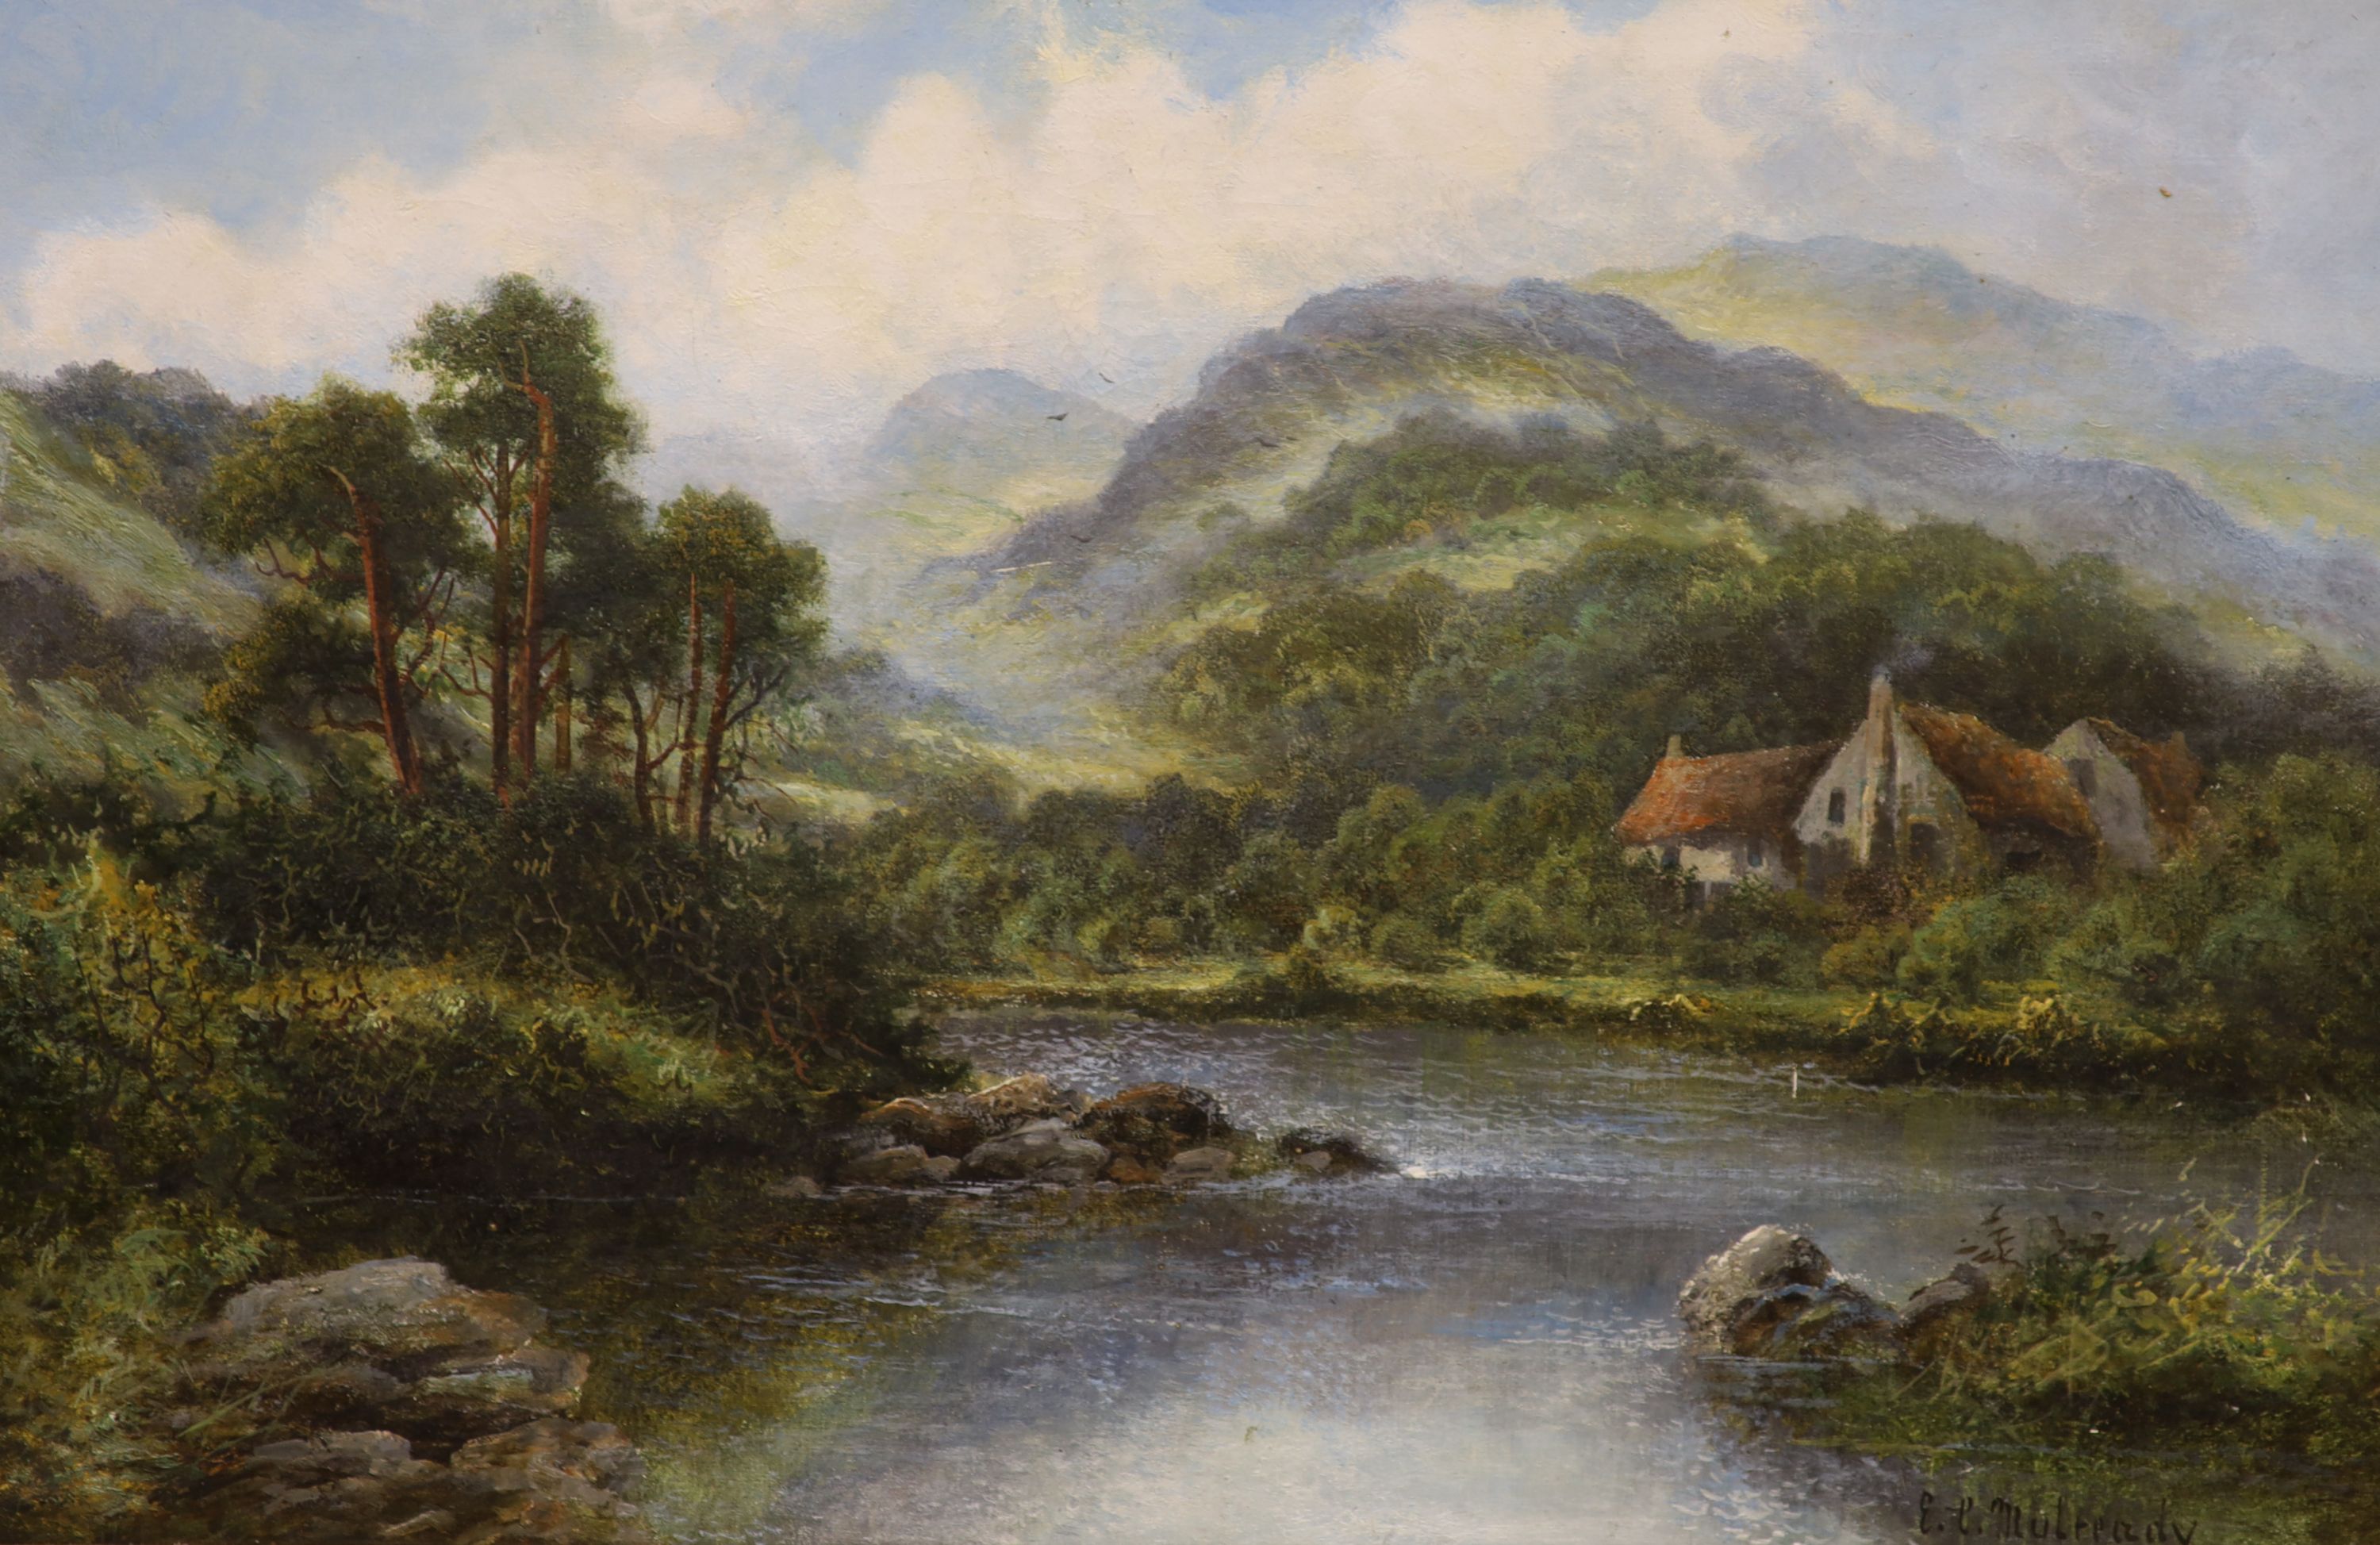 E C Mulready (19th century), a pair of Welsh (north Wales) landscape studies, 'Betys-y-Coed, N-Wales', with a cottage beside a river, and 'Capel Curig N-Wales', with Longhorn Cattle, signed lower right, oil on canvas, 40